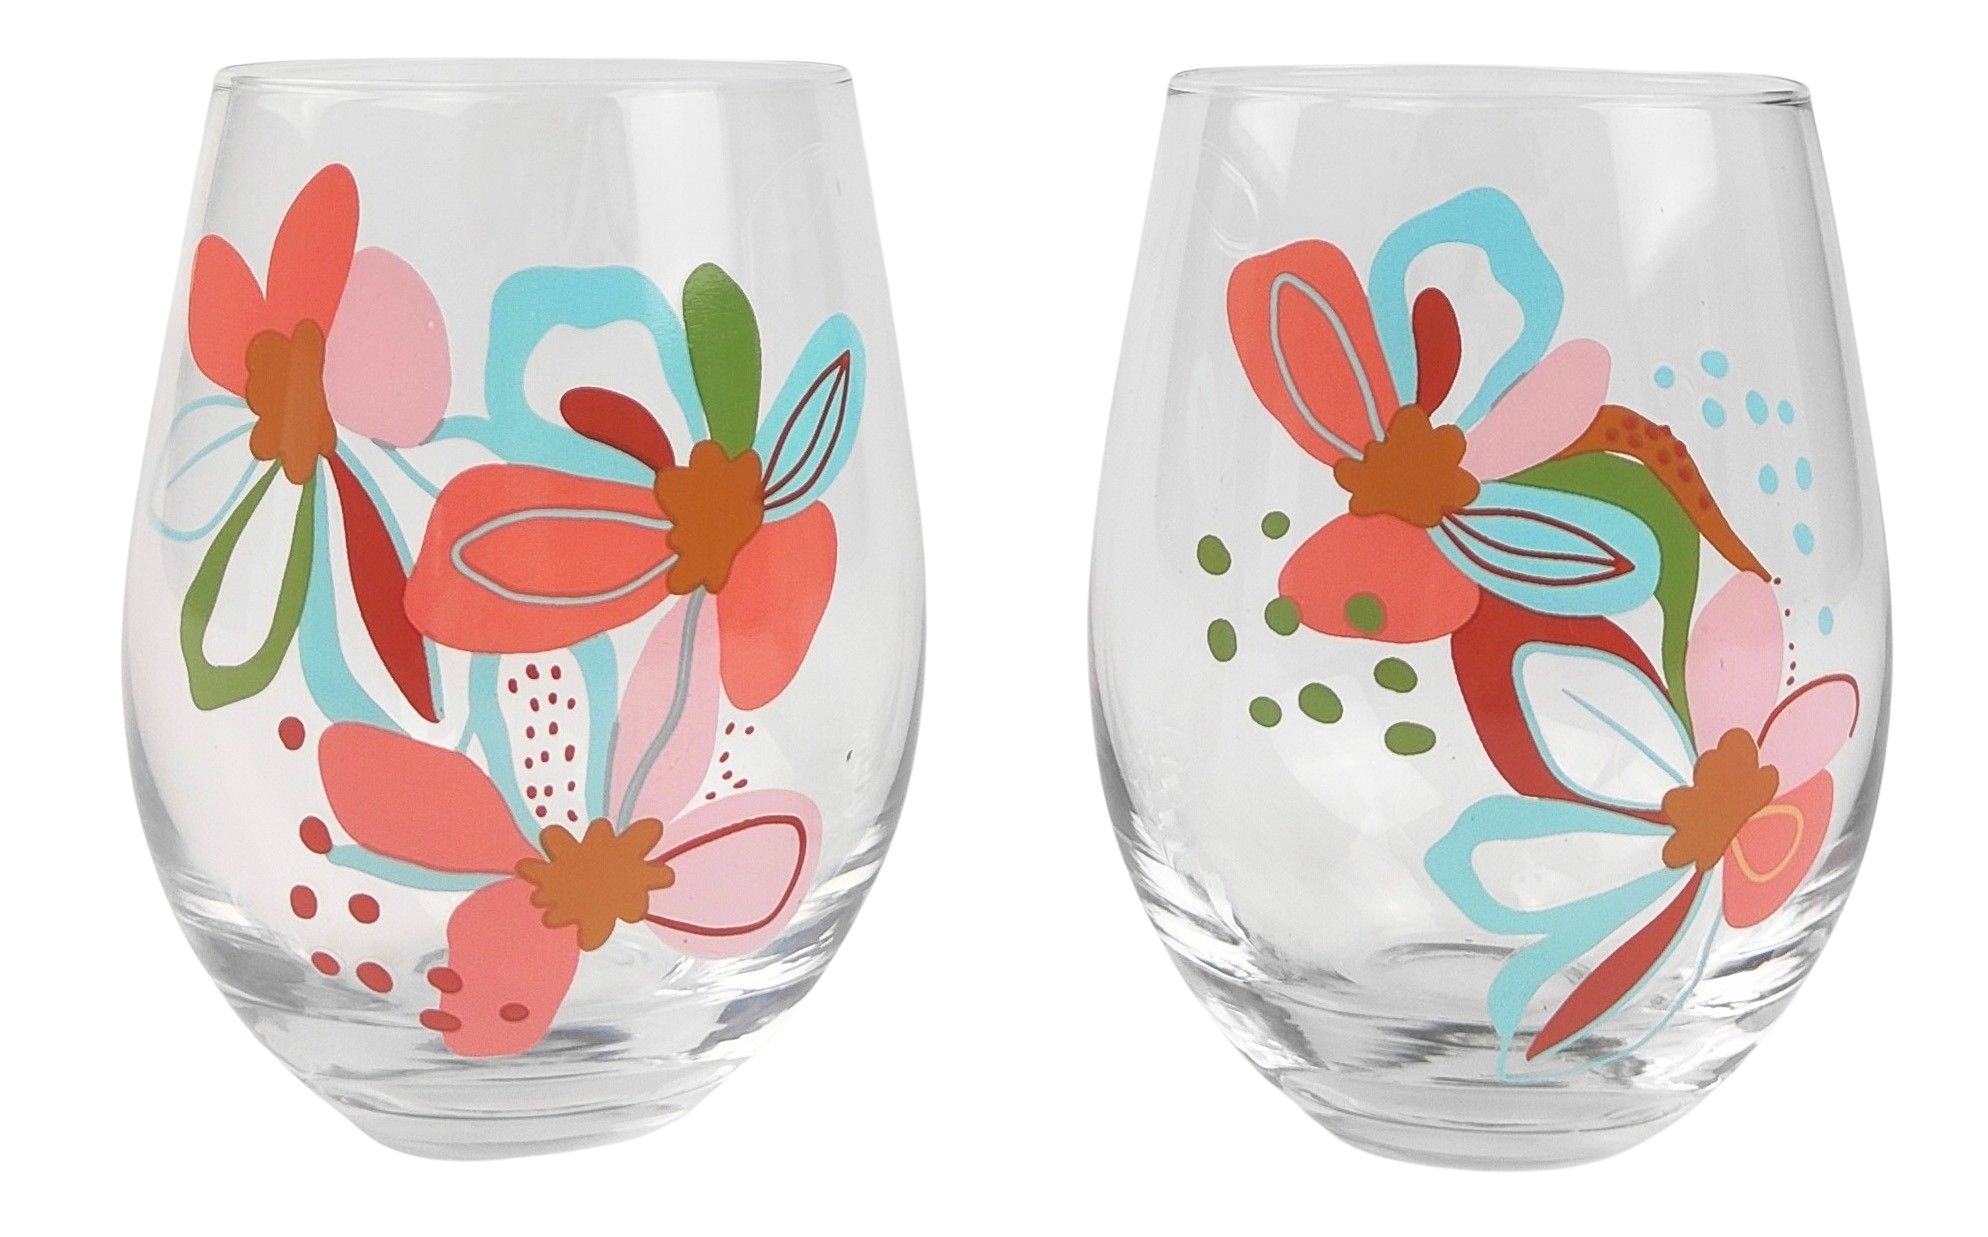 Boxed Stemless Wine Glass | Assorted Quotes | Set of 2